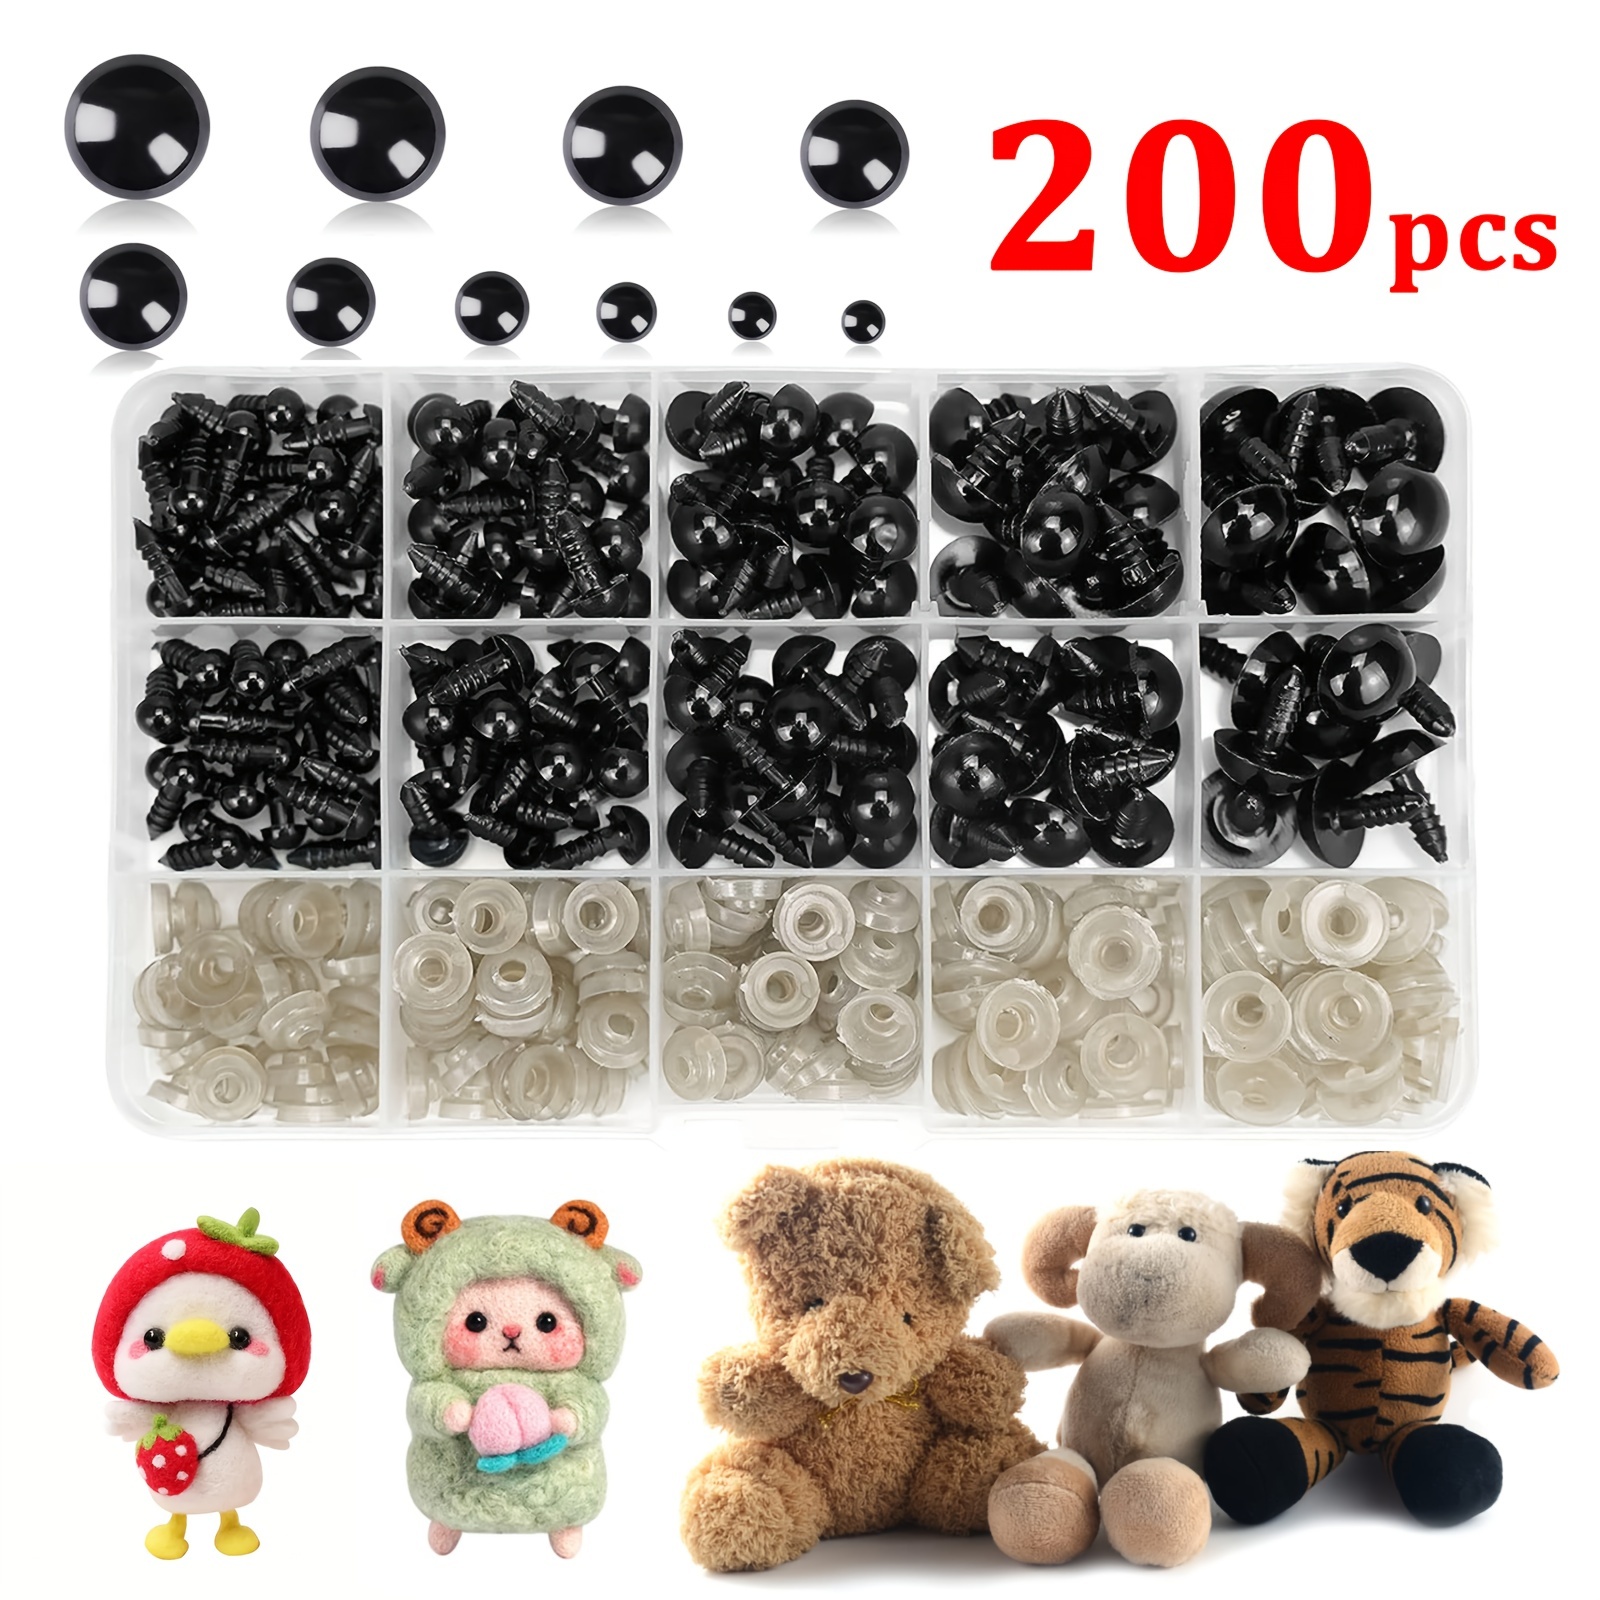 18-300pcs Brighten Up Your Amigurumi With Safety Eyes For Crochet Teddy  Bears, Dolls & Plush Animals Various Sizes Available